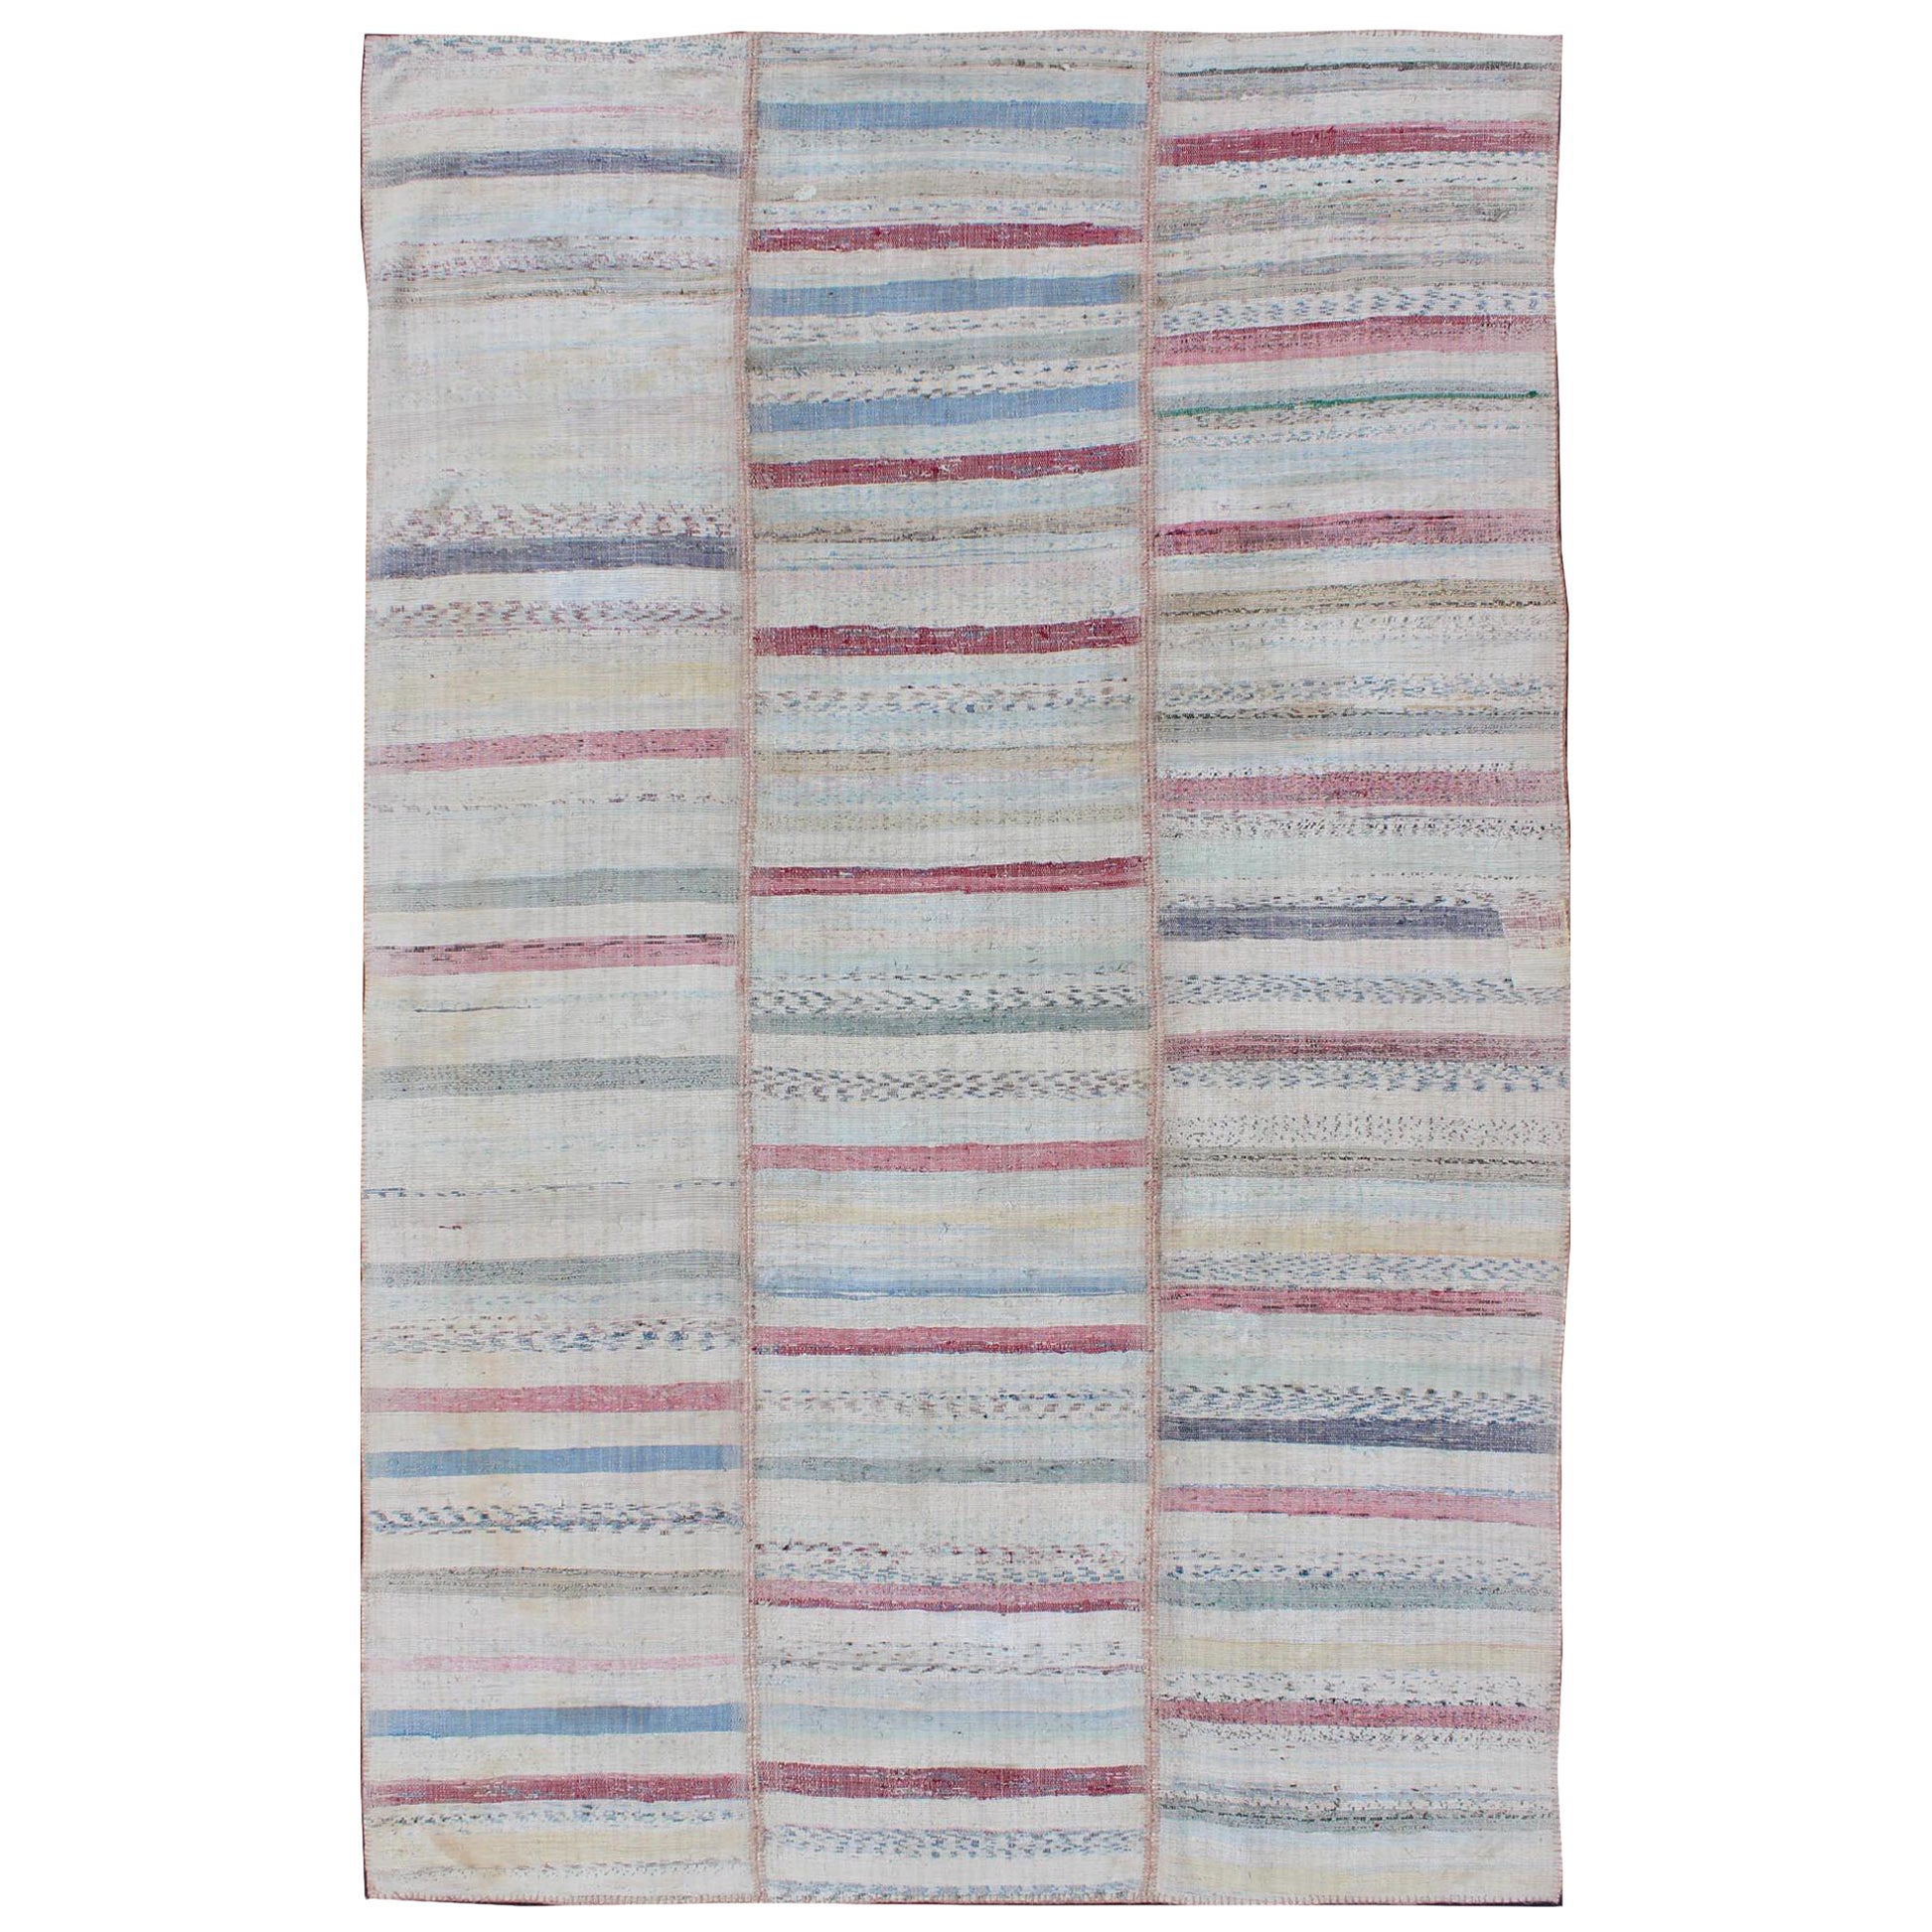 Multi-Panel Vintage Turkish Flat Weave Rug in Pink, Blue, Green and Cream For Sale